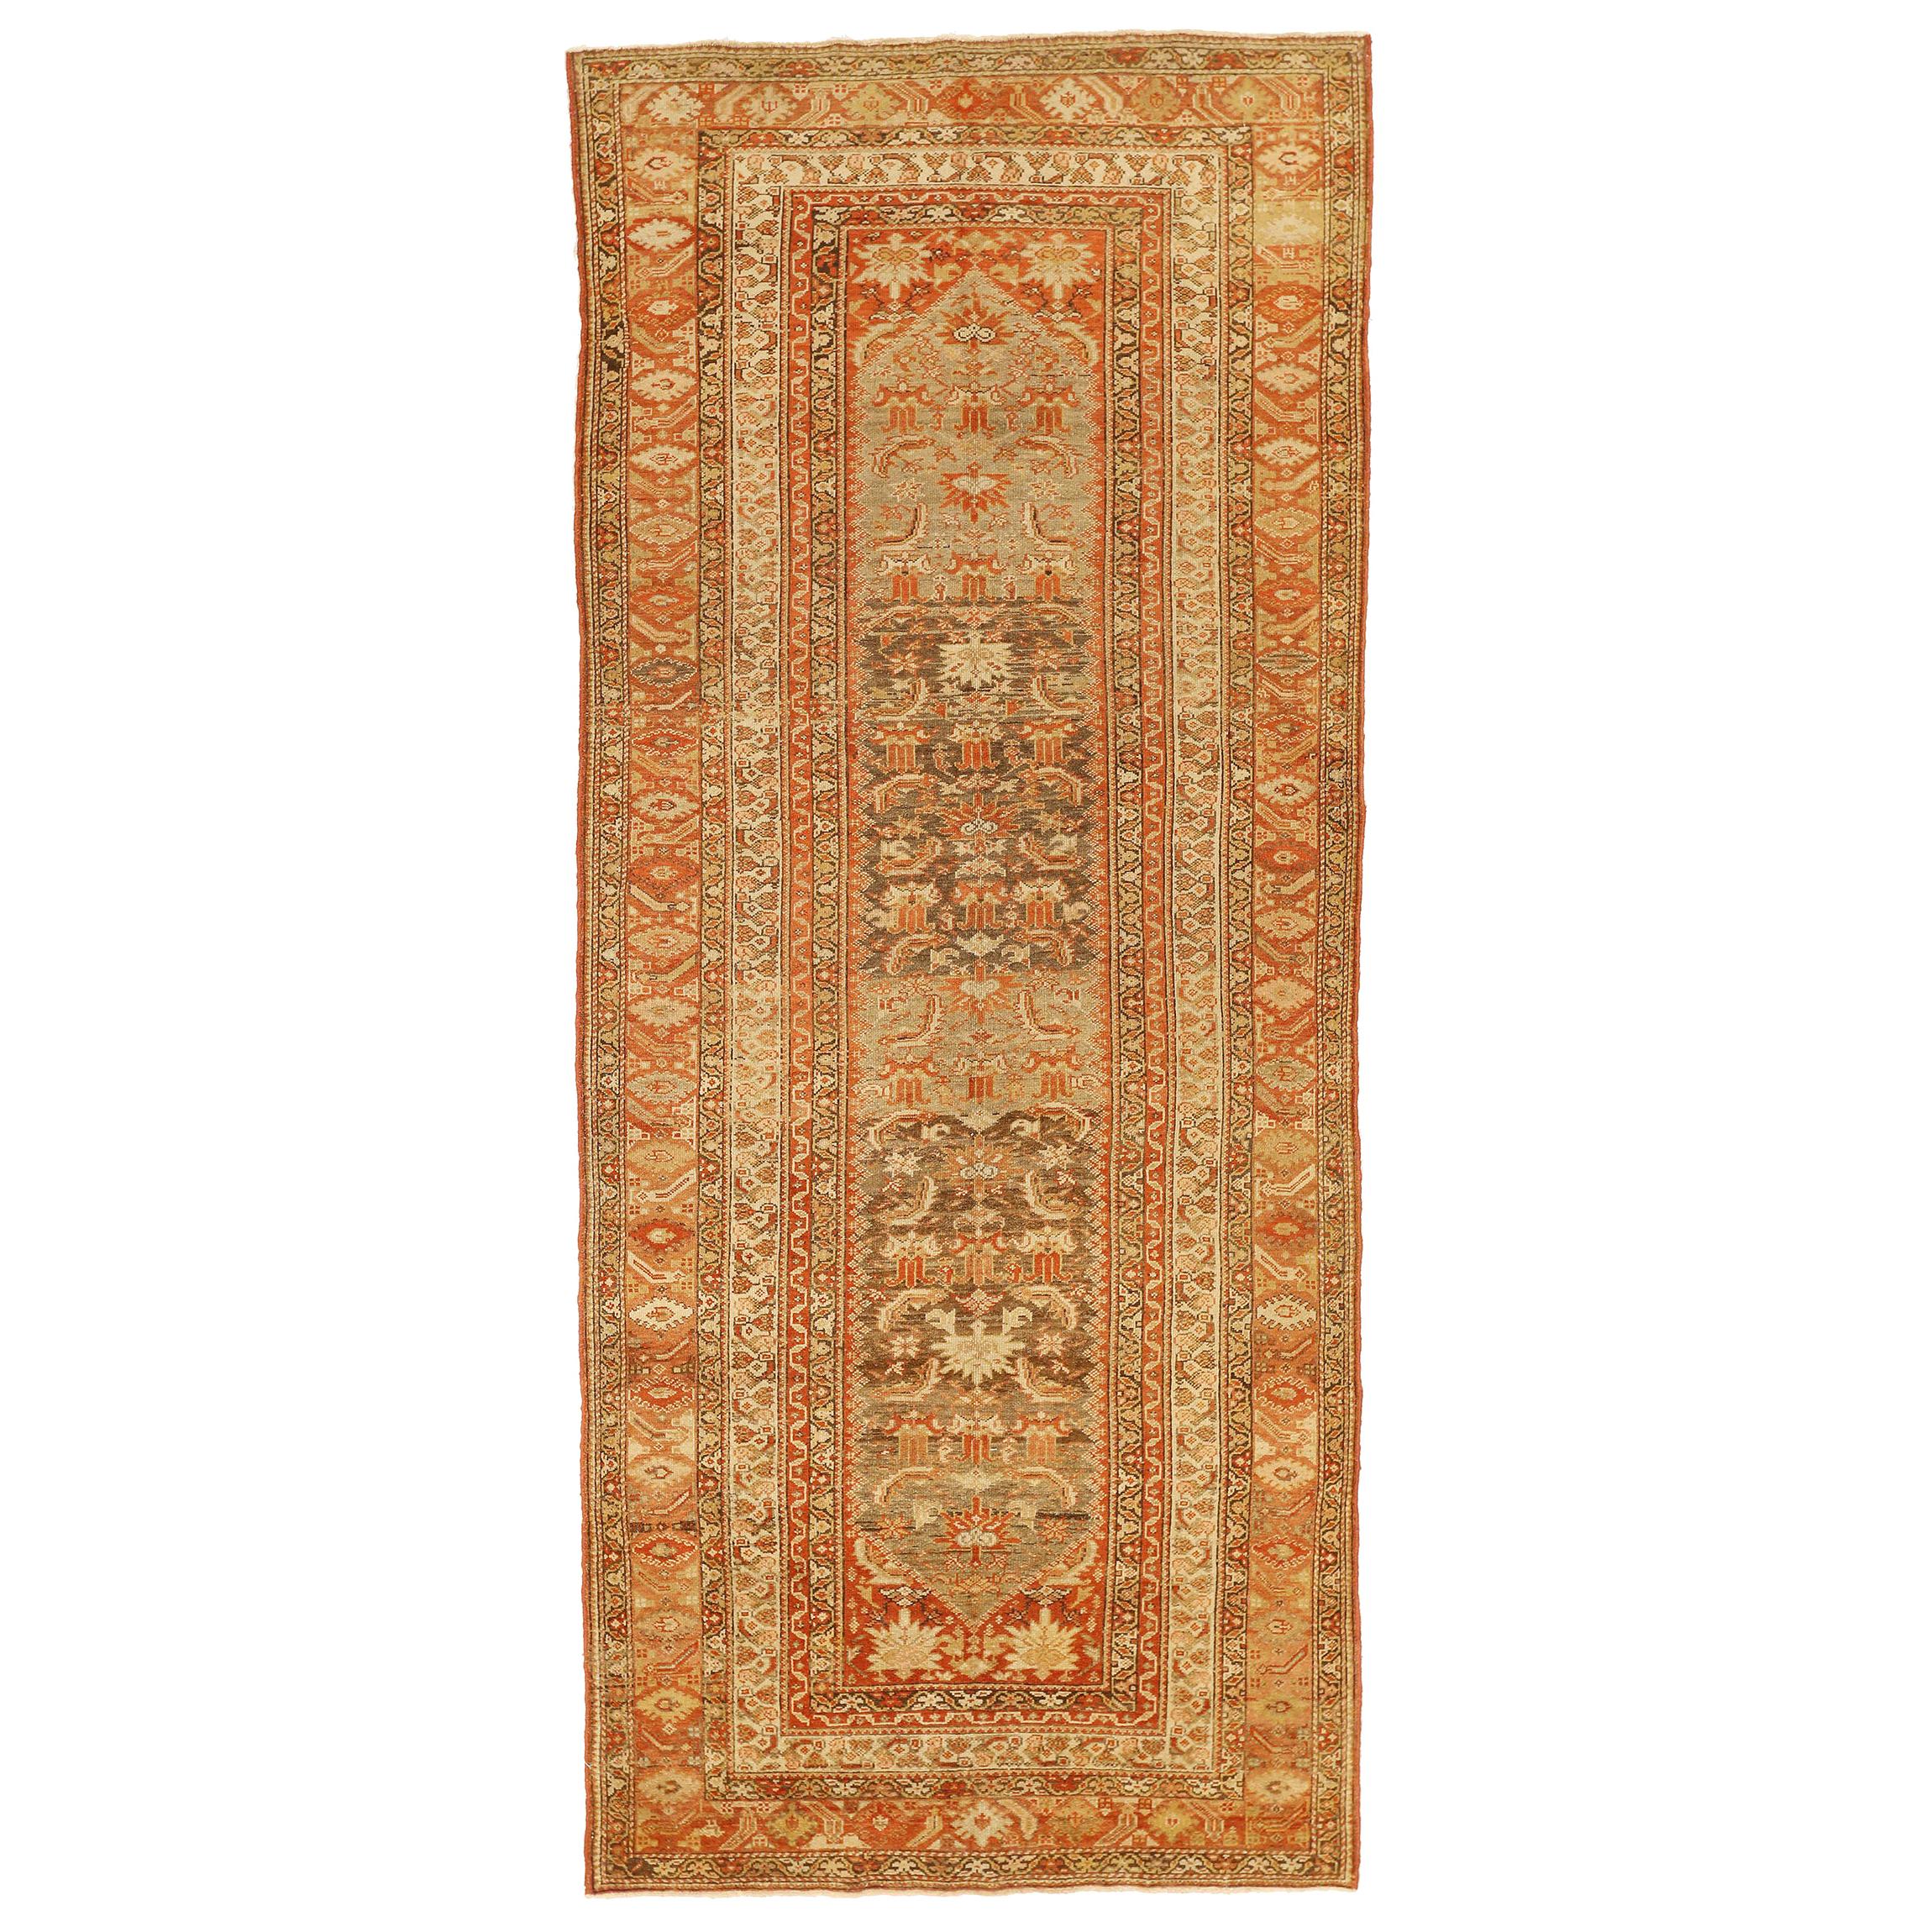 Antique Persian Malayer Rug with Ivory and Brown Botanical Details on Red Field